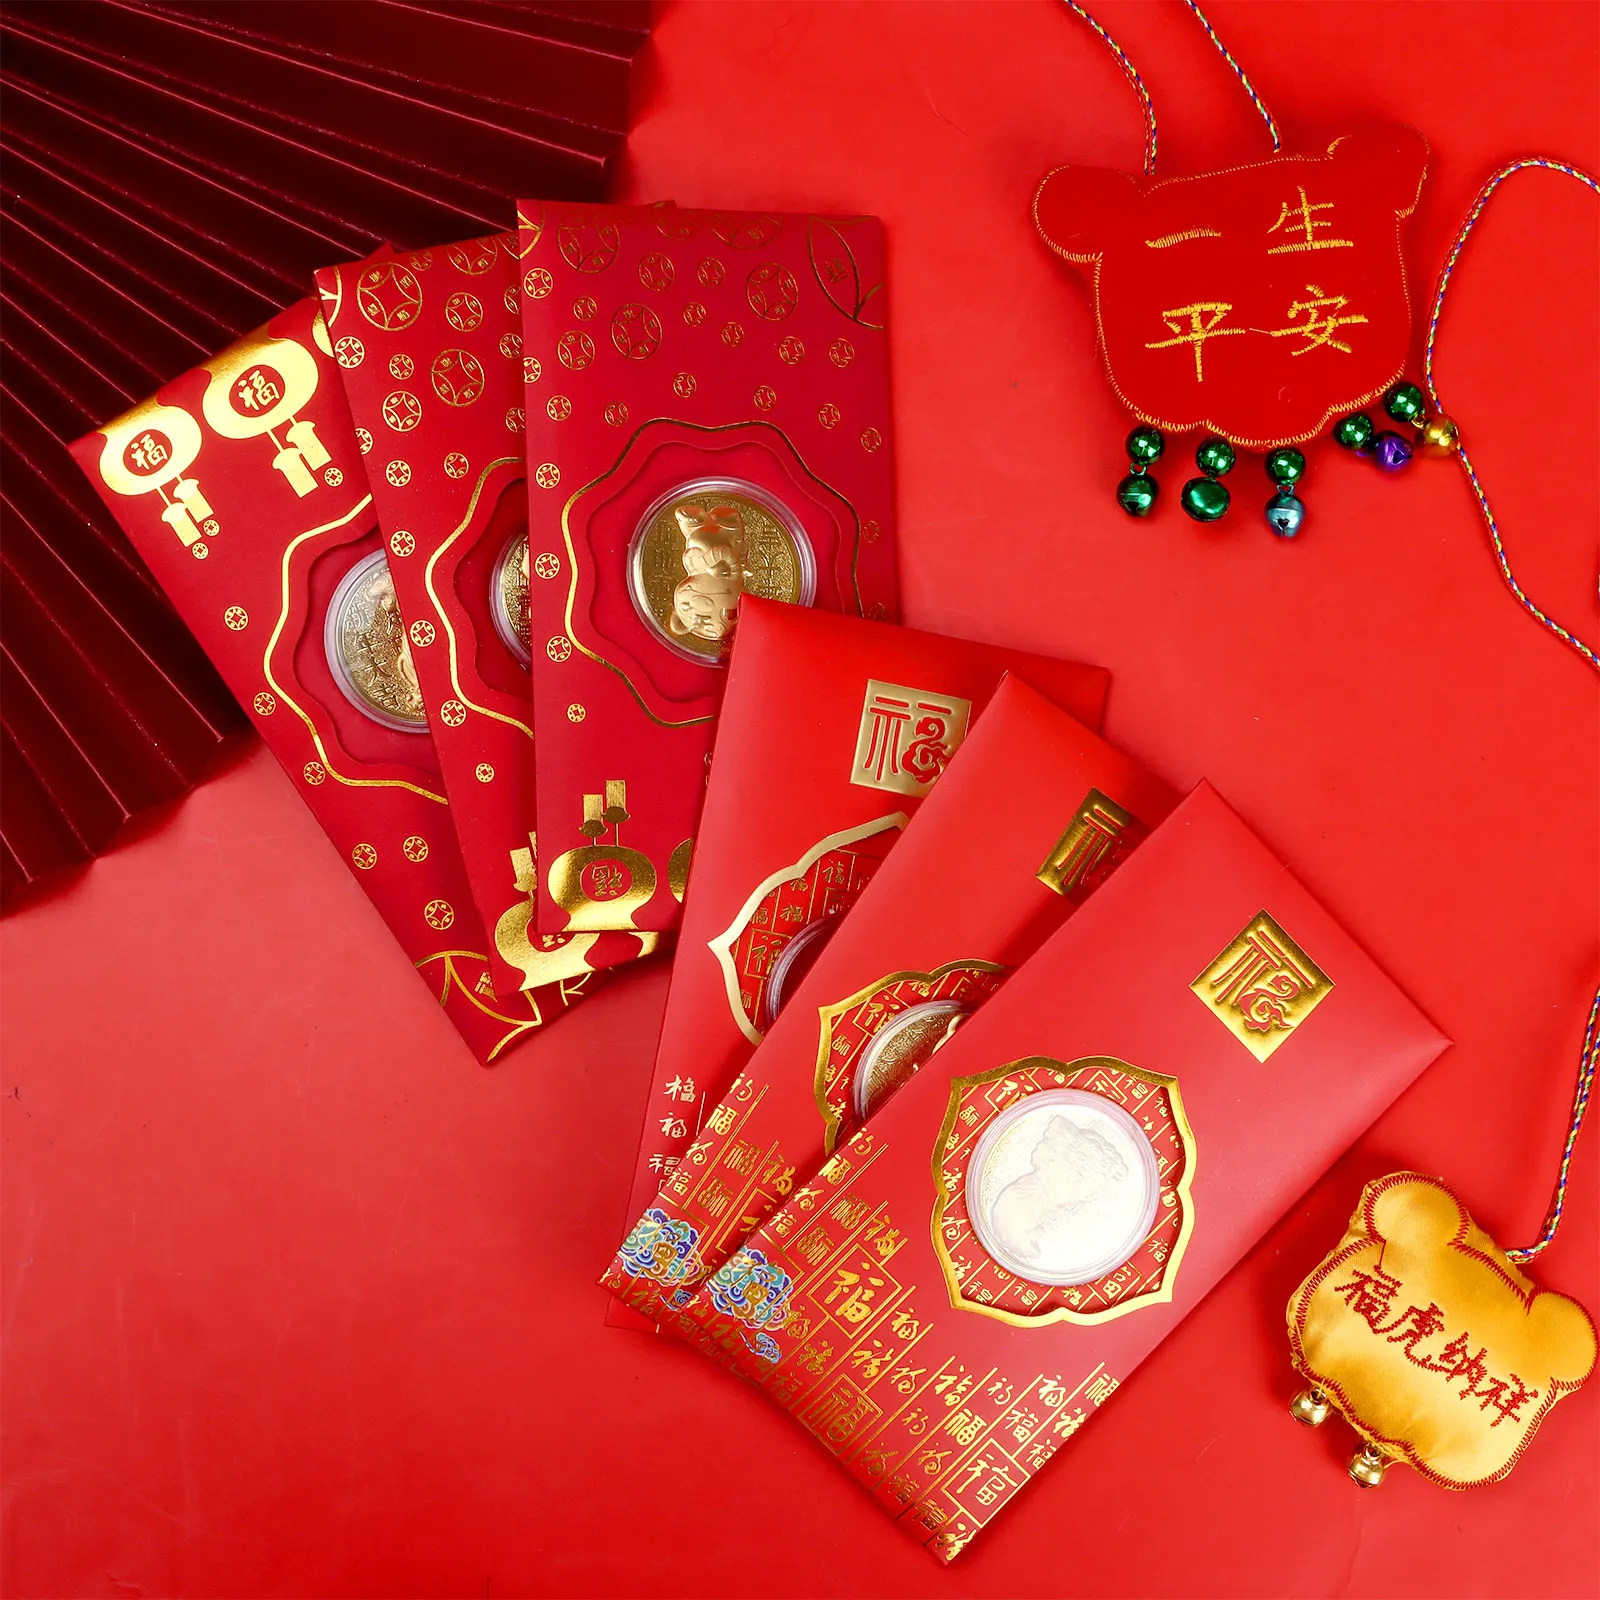 

6Pcs Red Envelopes 6Pcs Commemorative Coins Lucky Red Packet Cute Money Bag Spring Festival Supplies